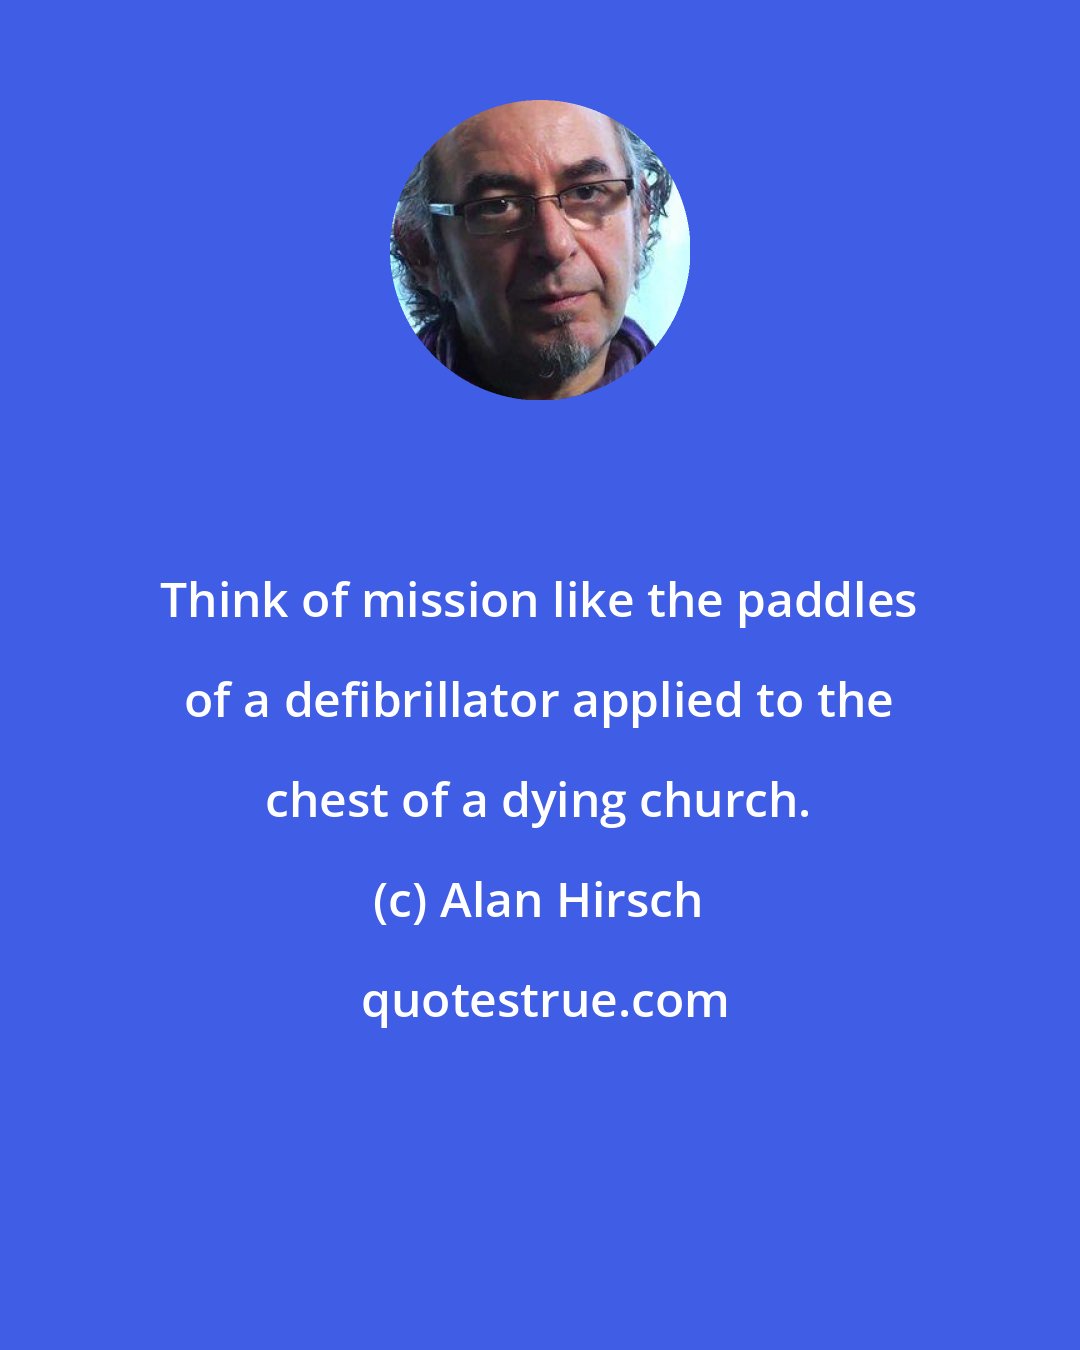 Alan Hirsch: Think of mission like the paddles of a defibrillator applied to the chest of a dying church.